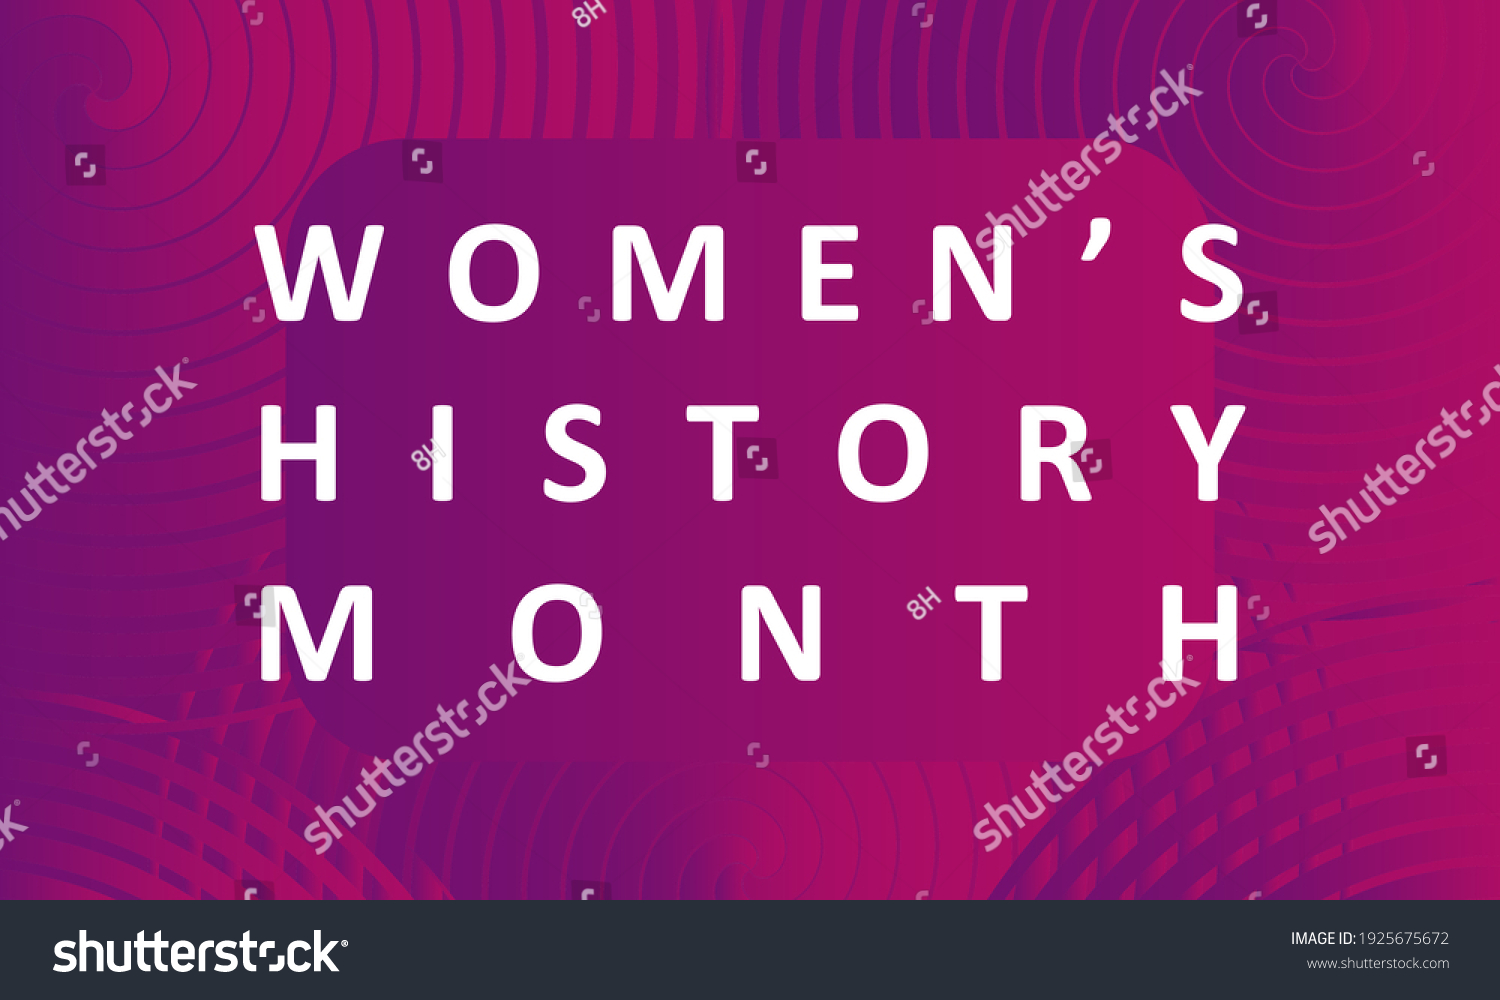 Womens History Month Card Poster Template Stock Illustration 1925675672 0519